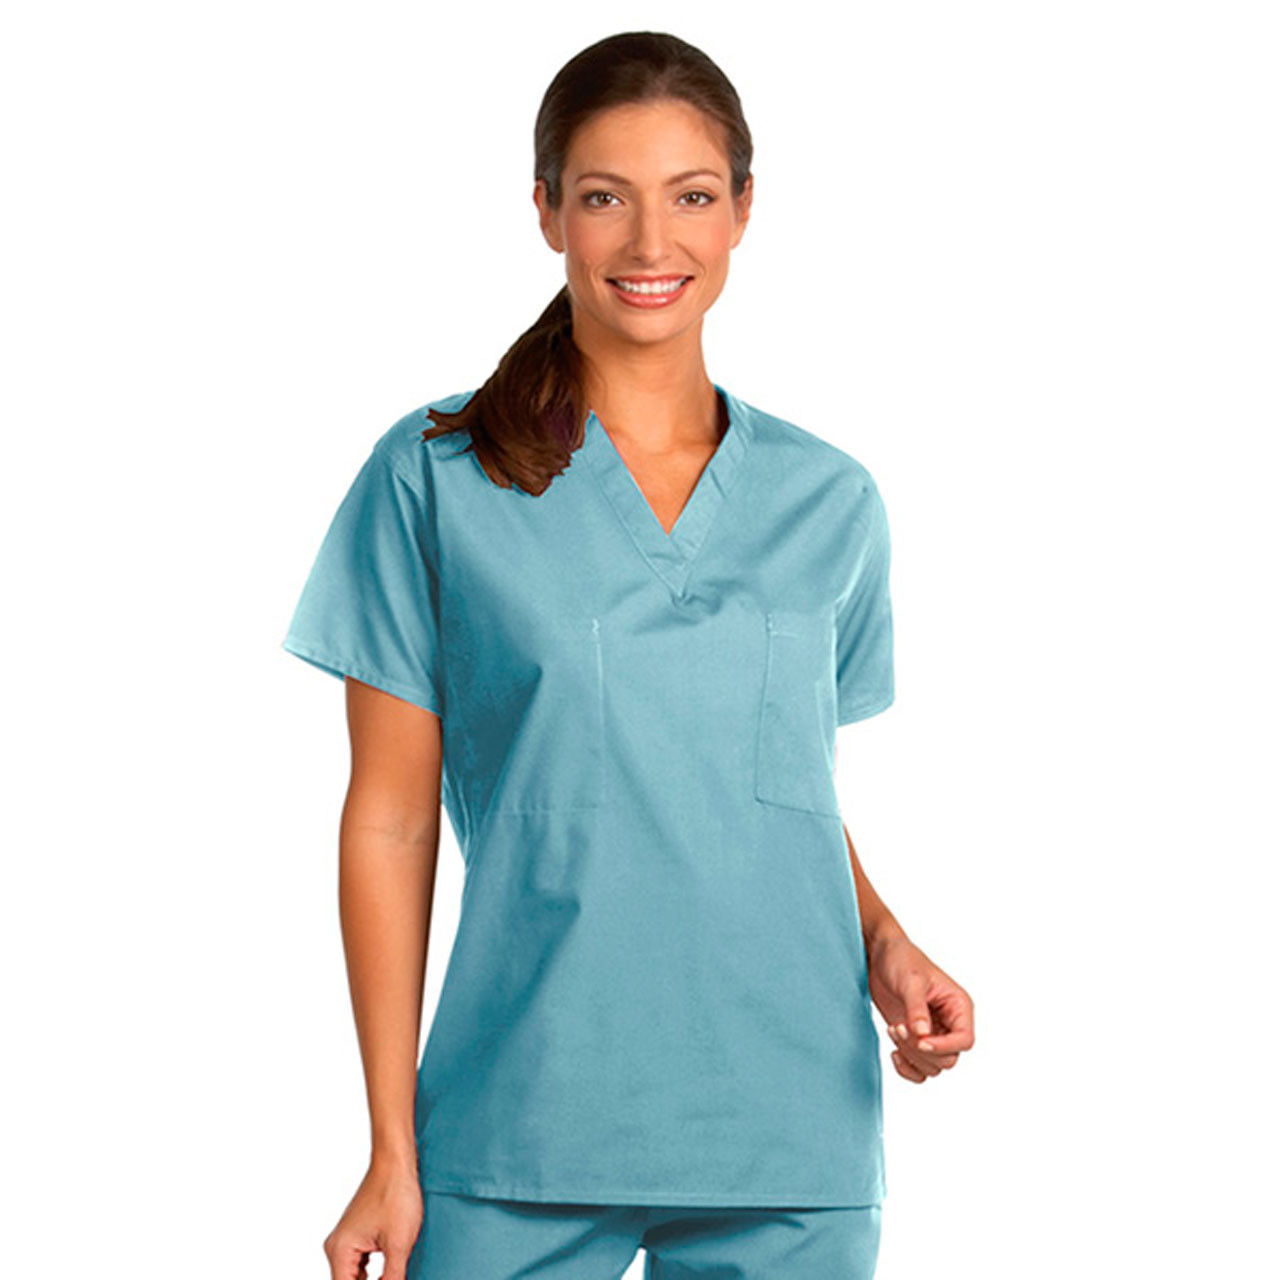 What materials are the surgical scrubs top and bottom made of in the Unisex Set?